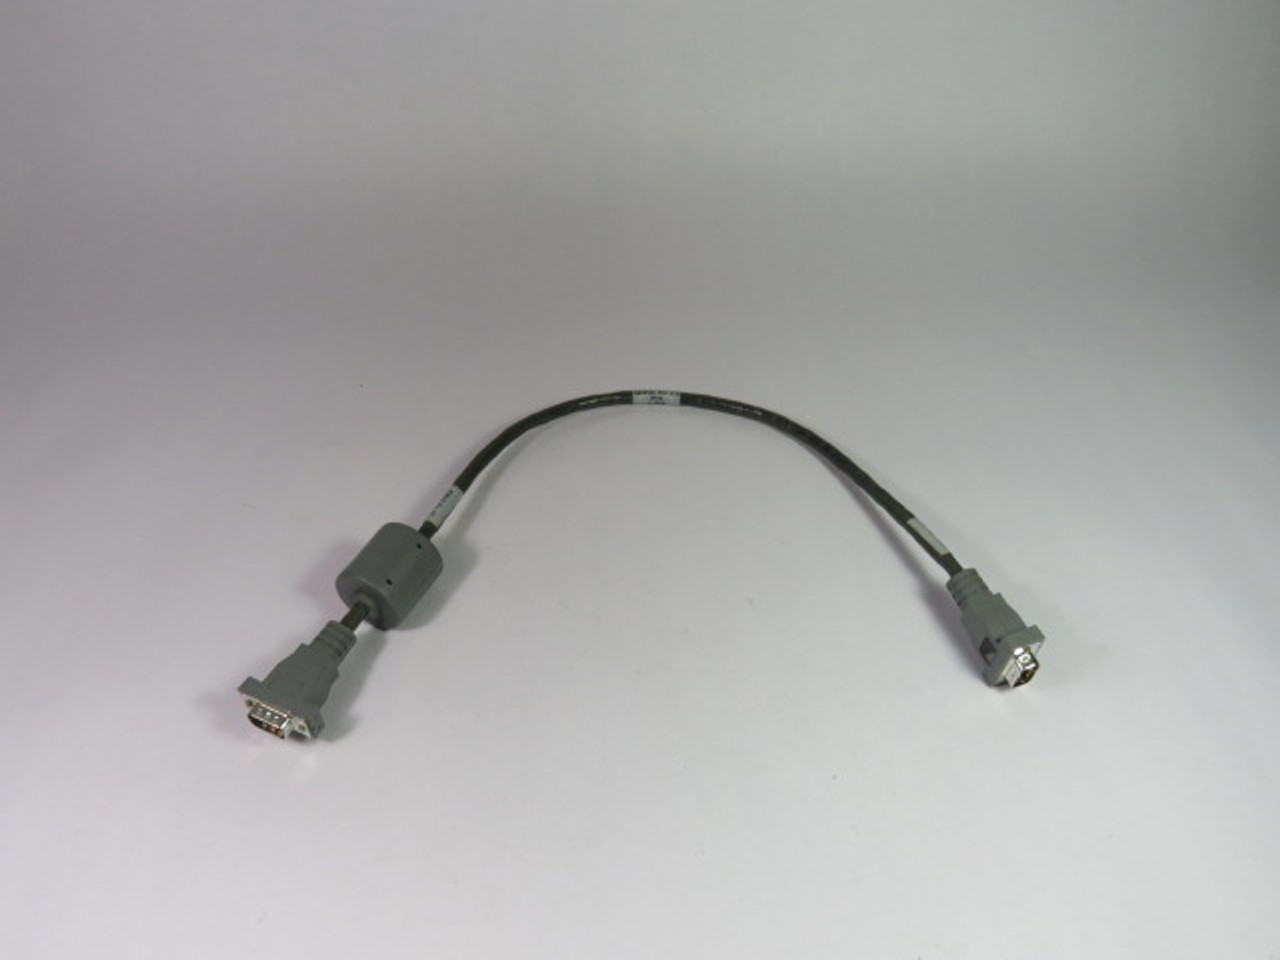 Vutek AA90927 J7 Controller Cable USED